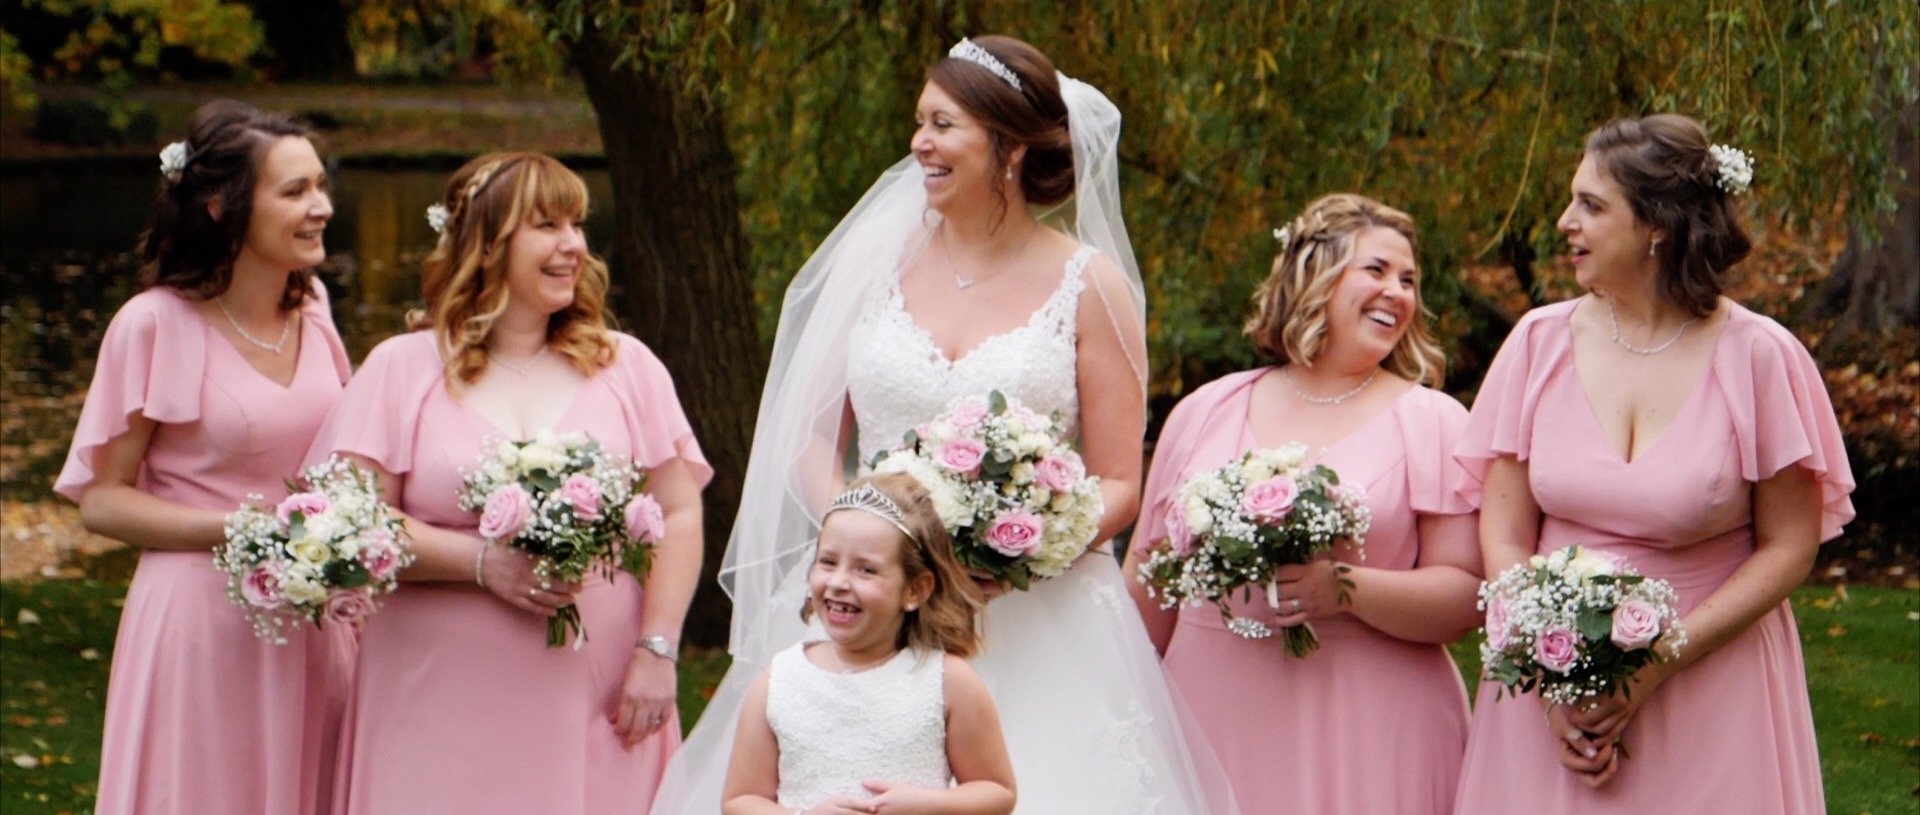 Bridal Party video at Mulberry House essex.jpg